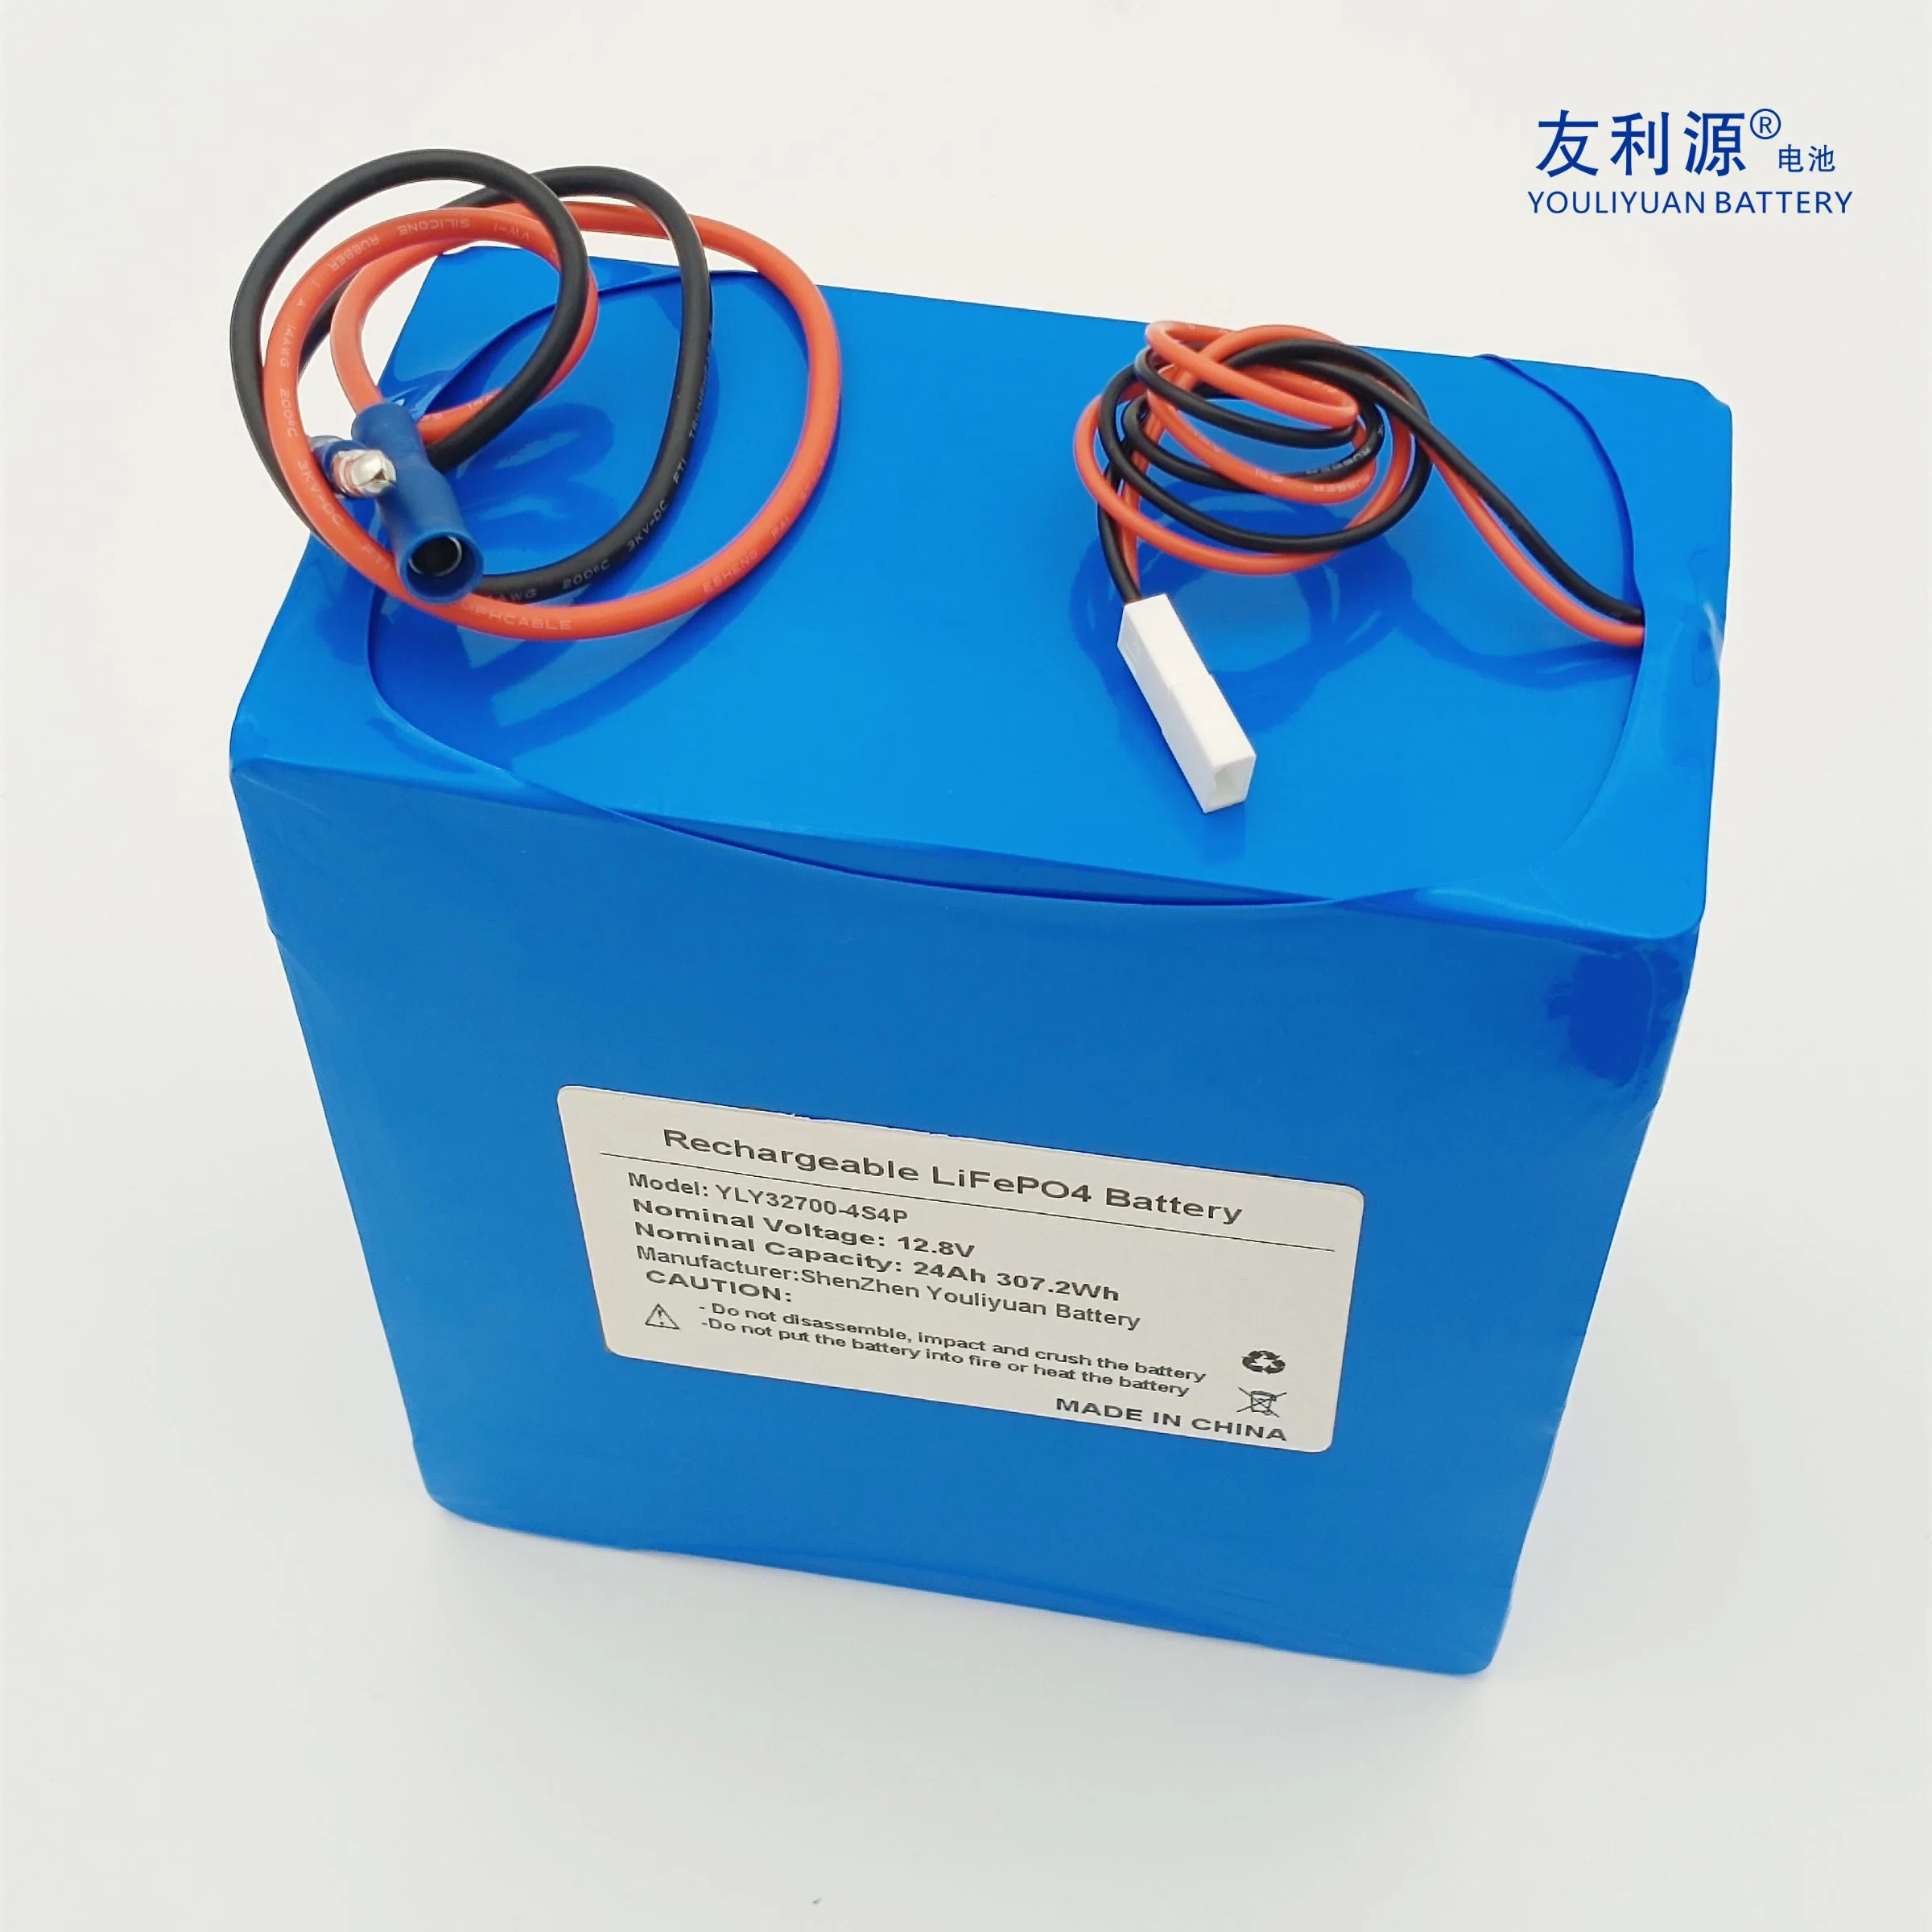 Manufacturer Wholesale 12V 24ah 24ah 30ah 36ah 42ah LiFePO4/Lithium Iron Phosphate Battery for EV Robots All-in-One Solar Street Lights Emergency Power Supply